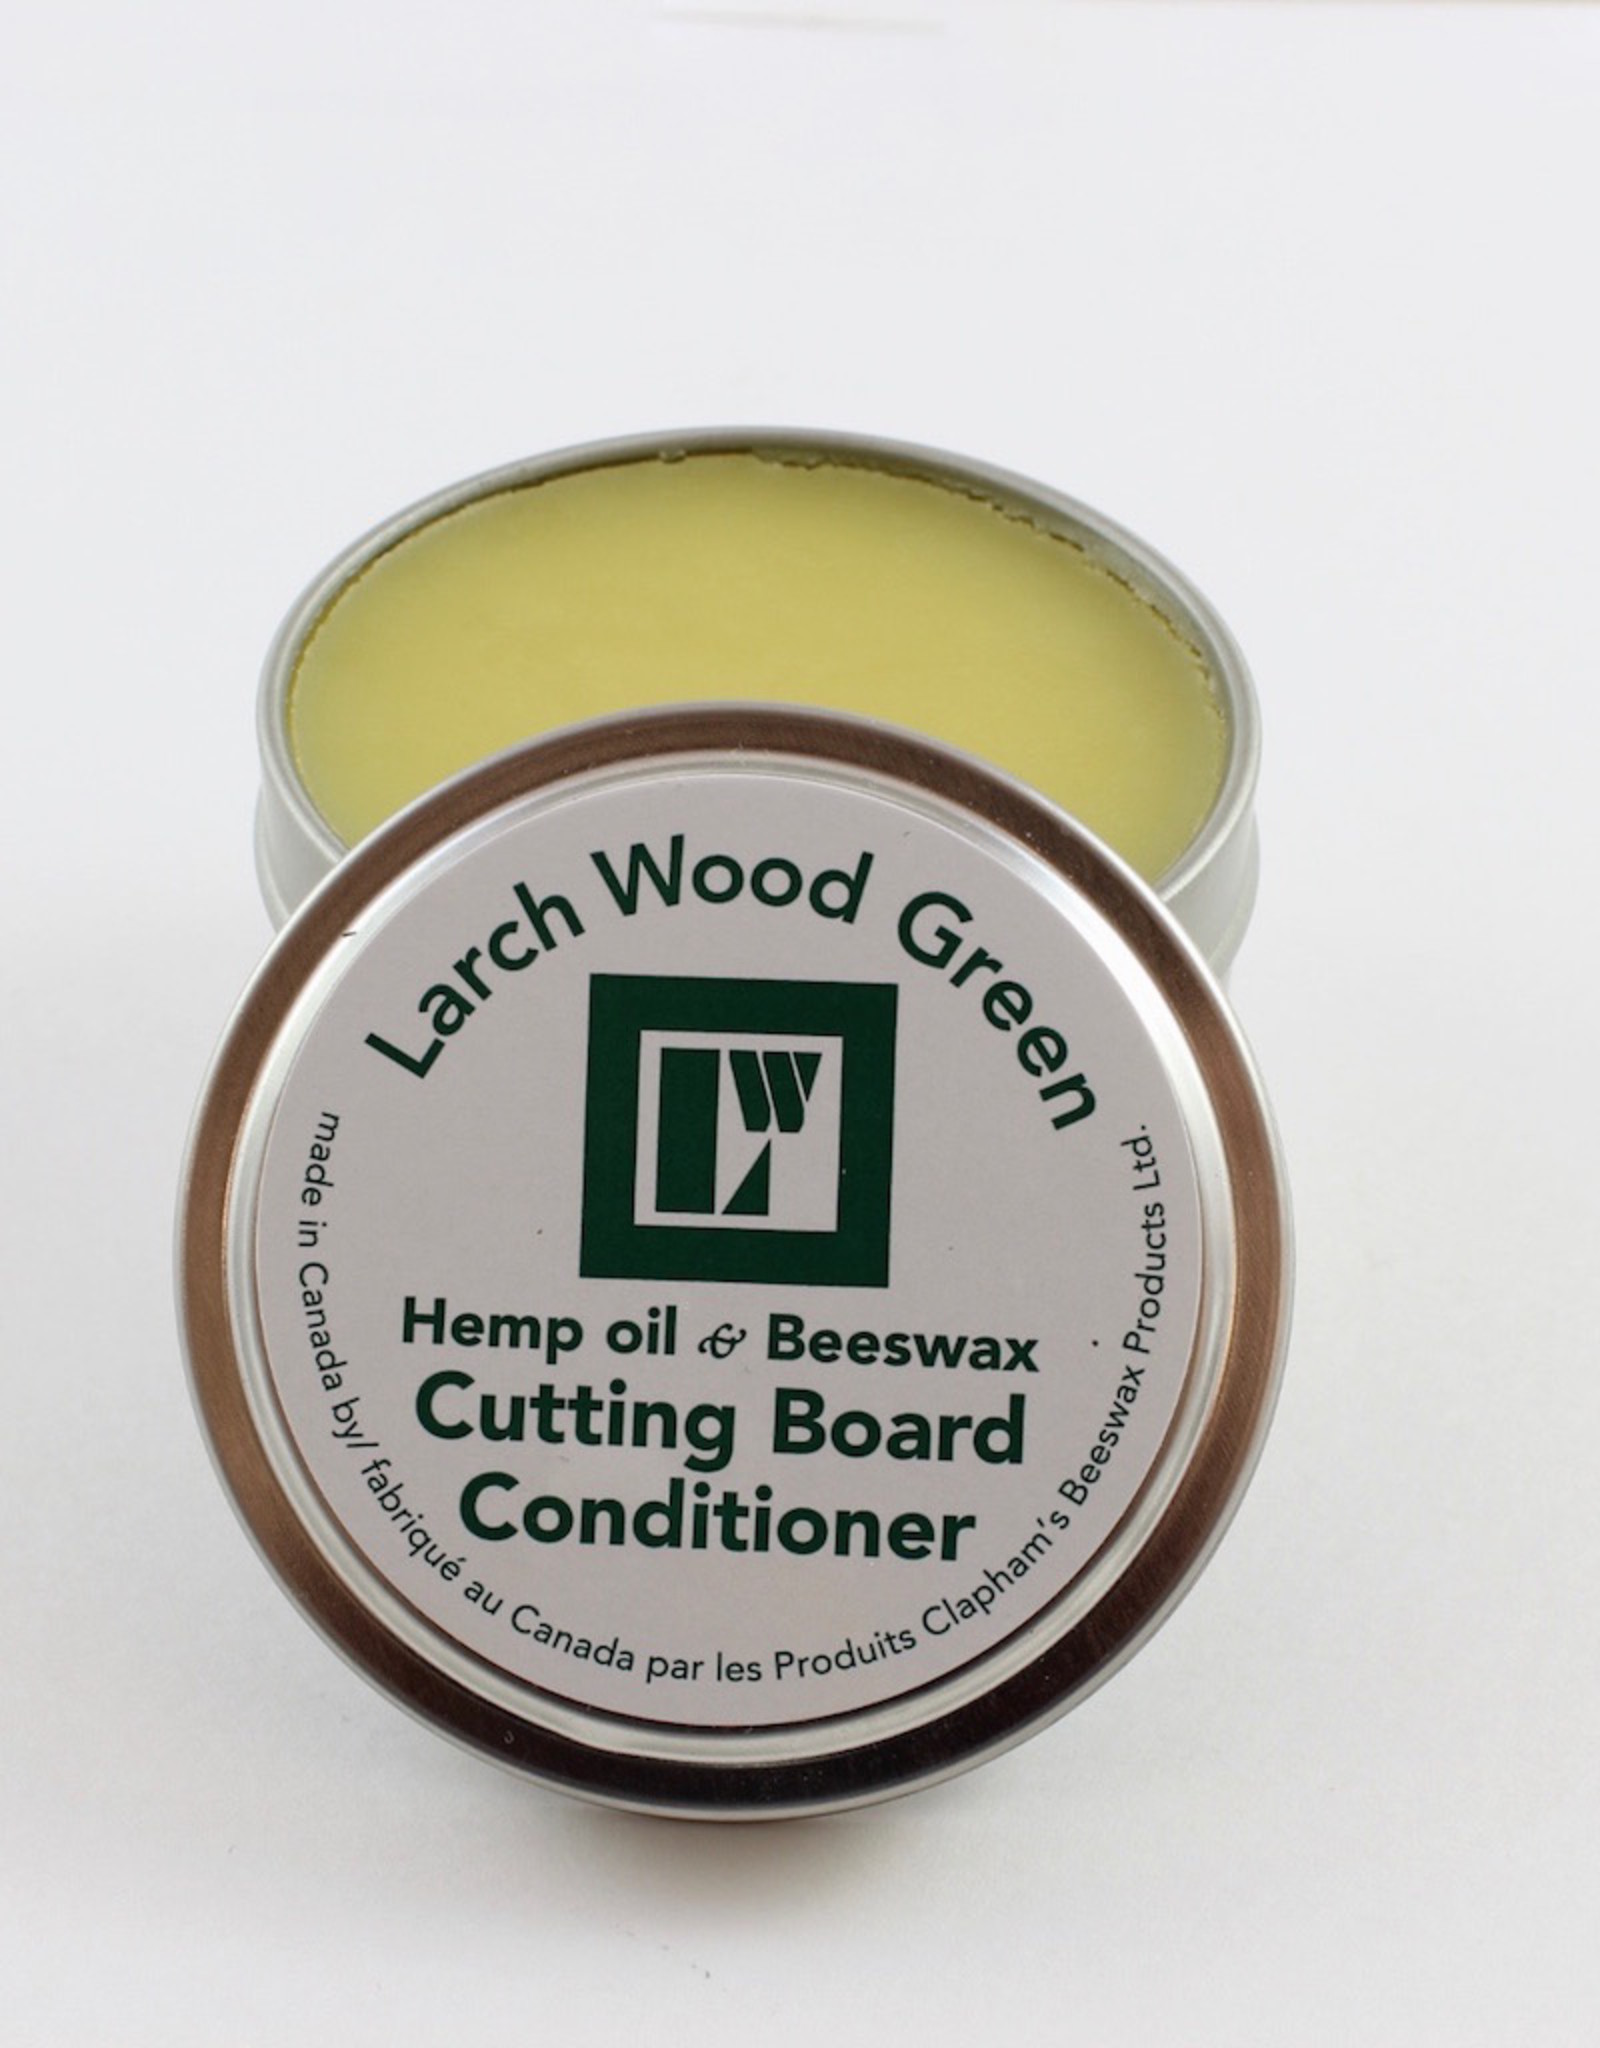 Larch Wood Beeswax and Hemp Oil Cutting Board Conditioner by Larch Wood  (large)